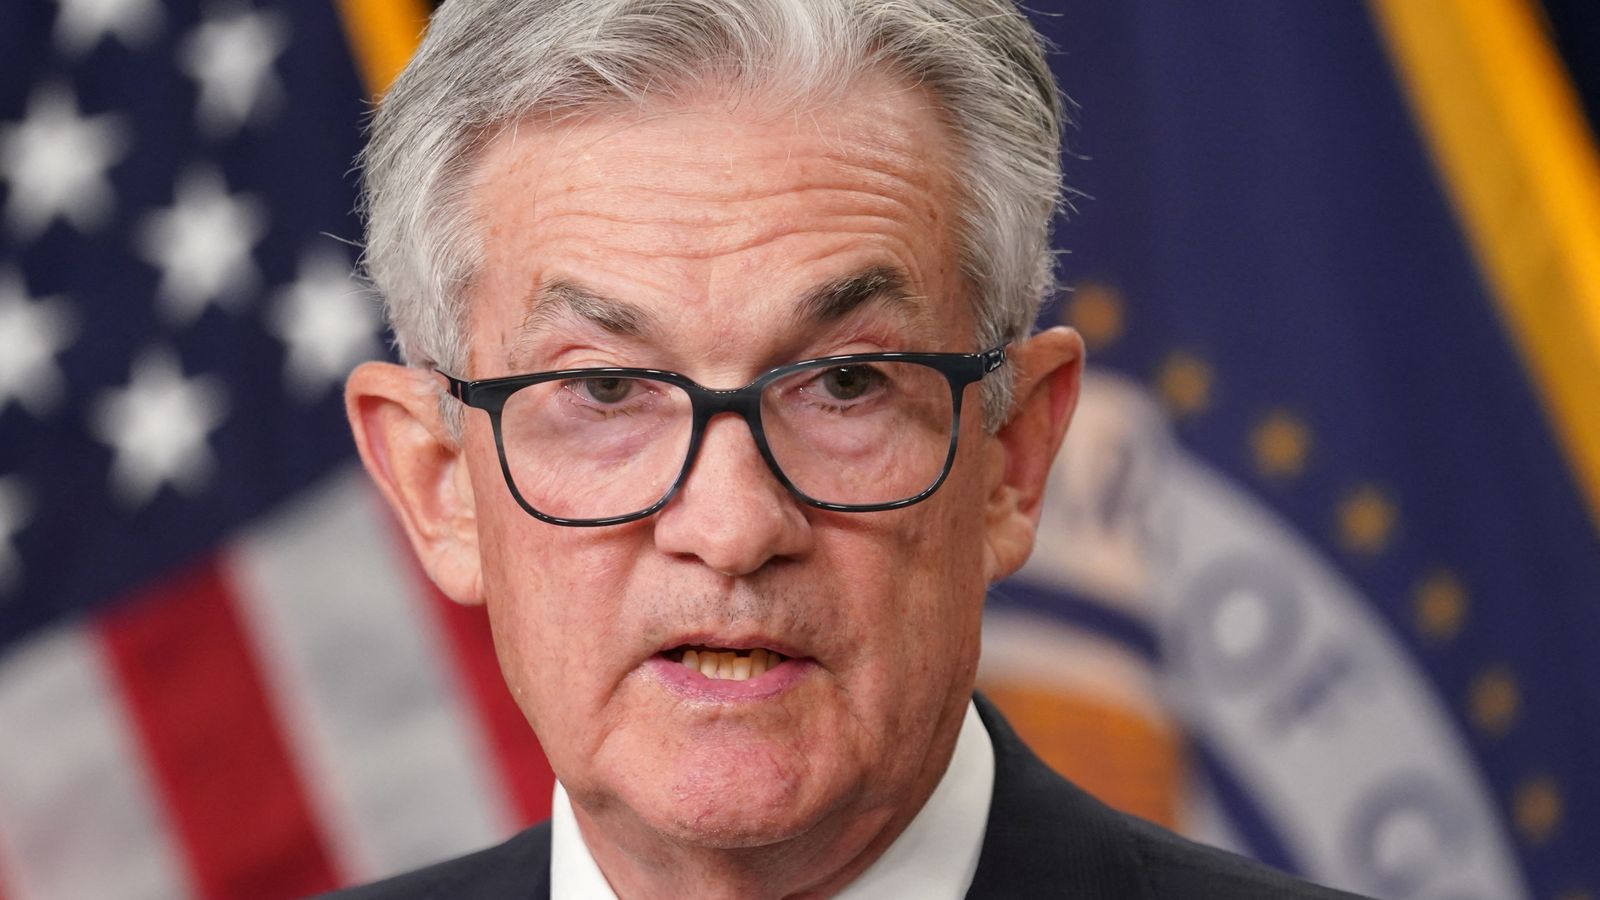 Federal Reserve slows pace of inflation rate hikes again but warns of more action ahead